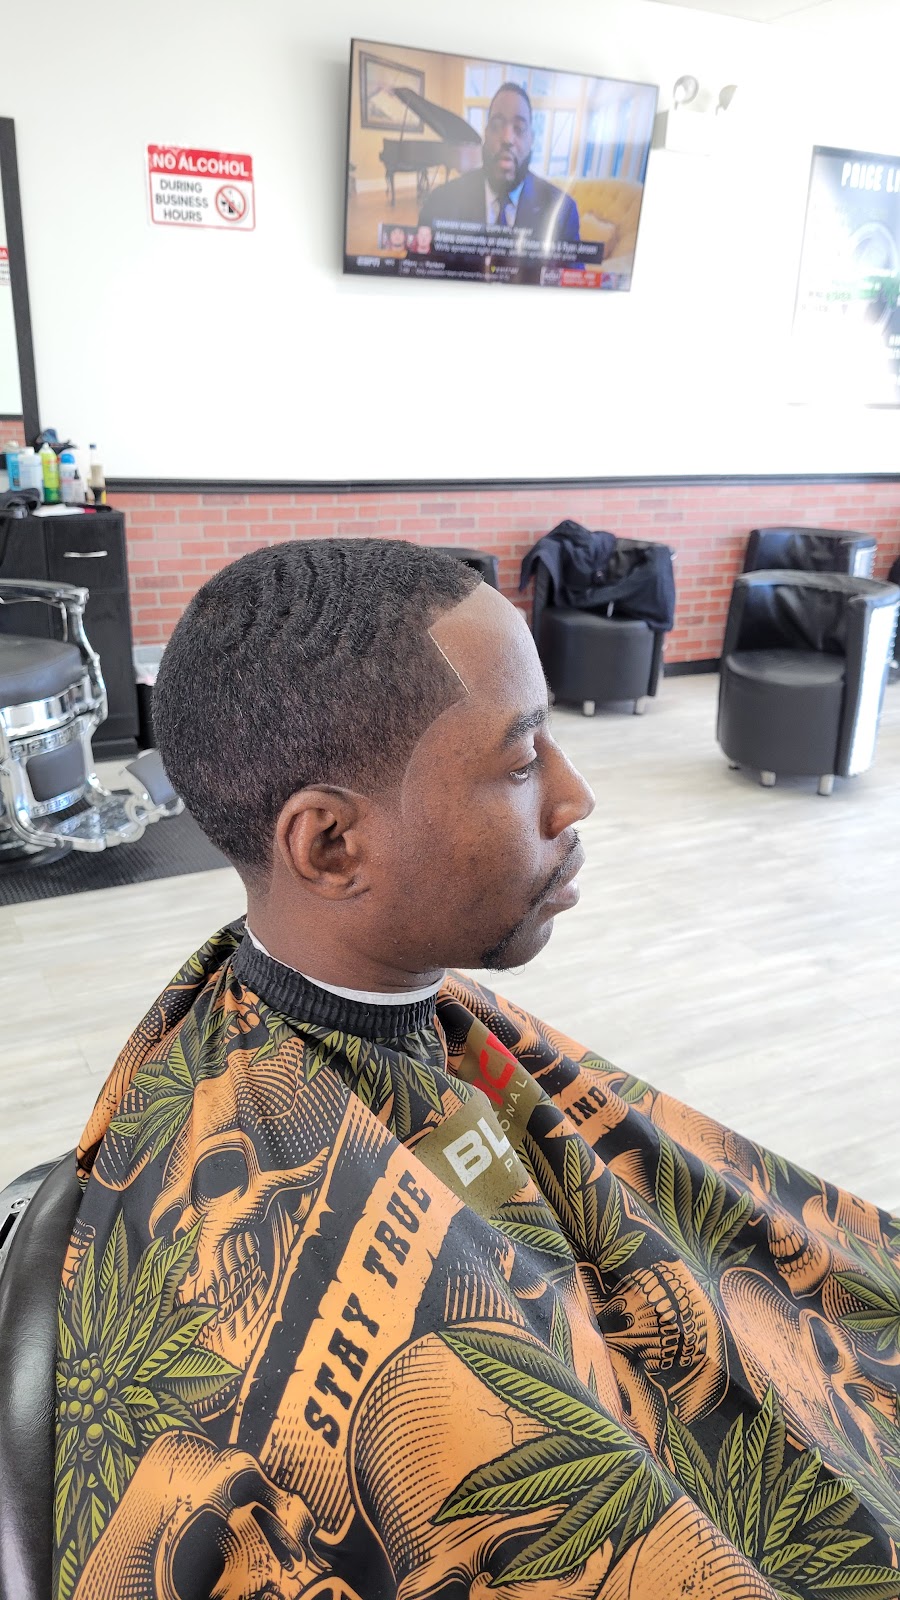 Beauti PRO | 5638 W Roosevelt Rd, Chicago, IL 60644 | Phone: (773) 606-1411